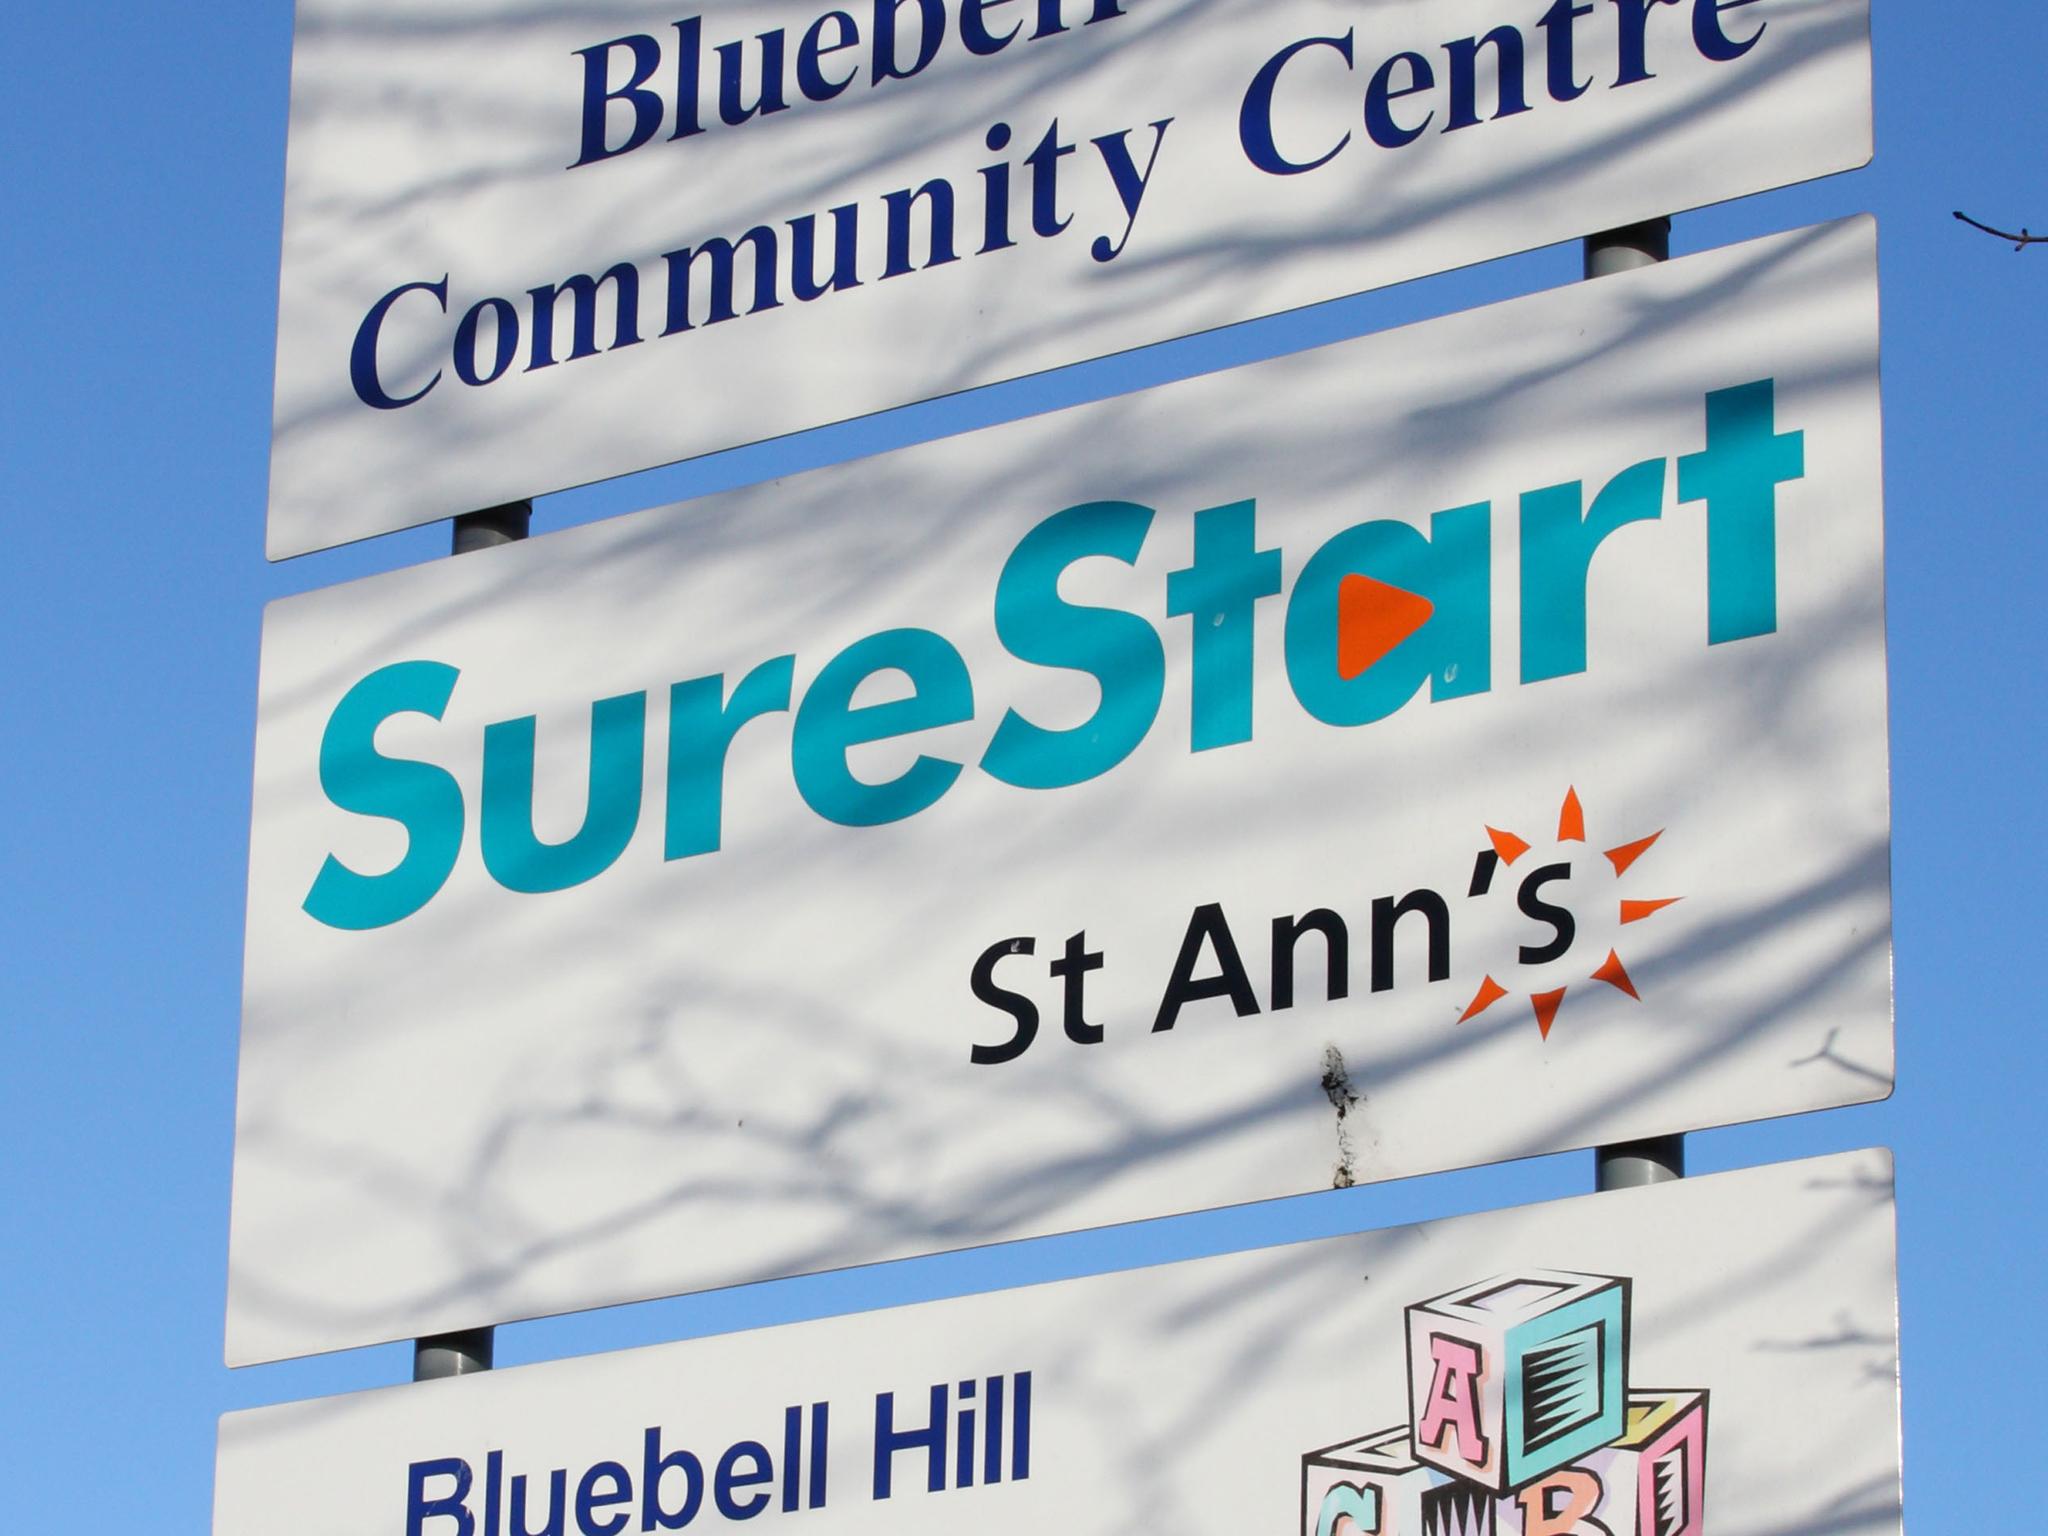 500 Sure Start Centres have closed between 2010 and 2018, with budgets halved